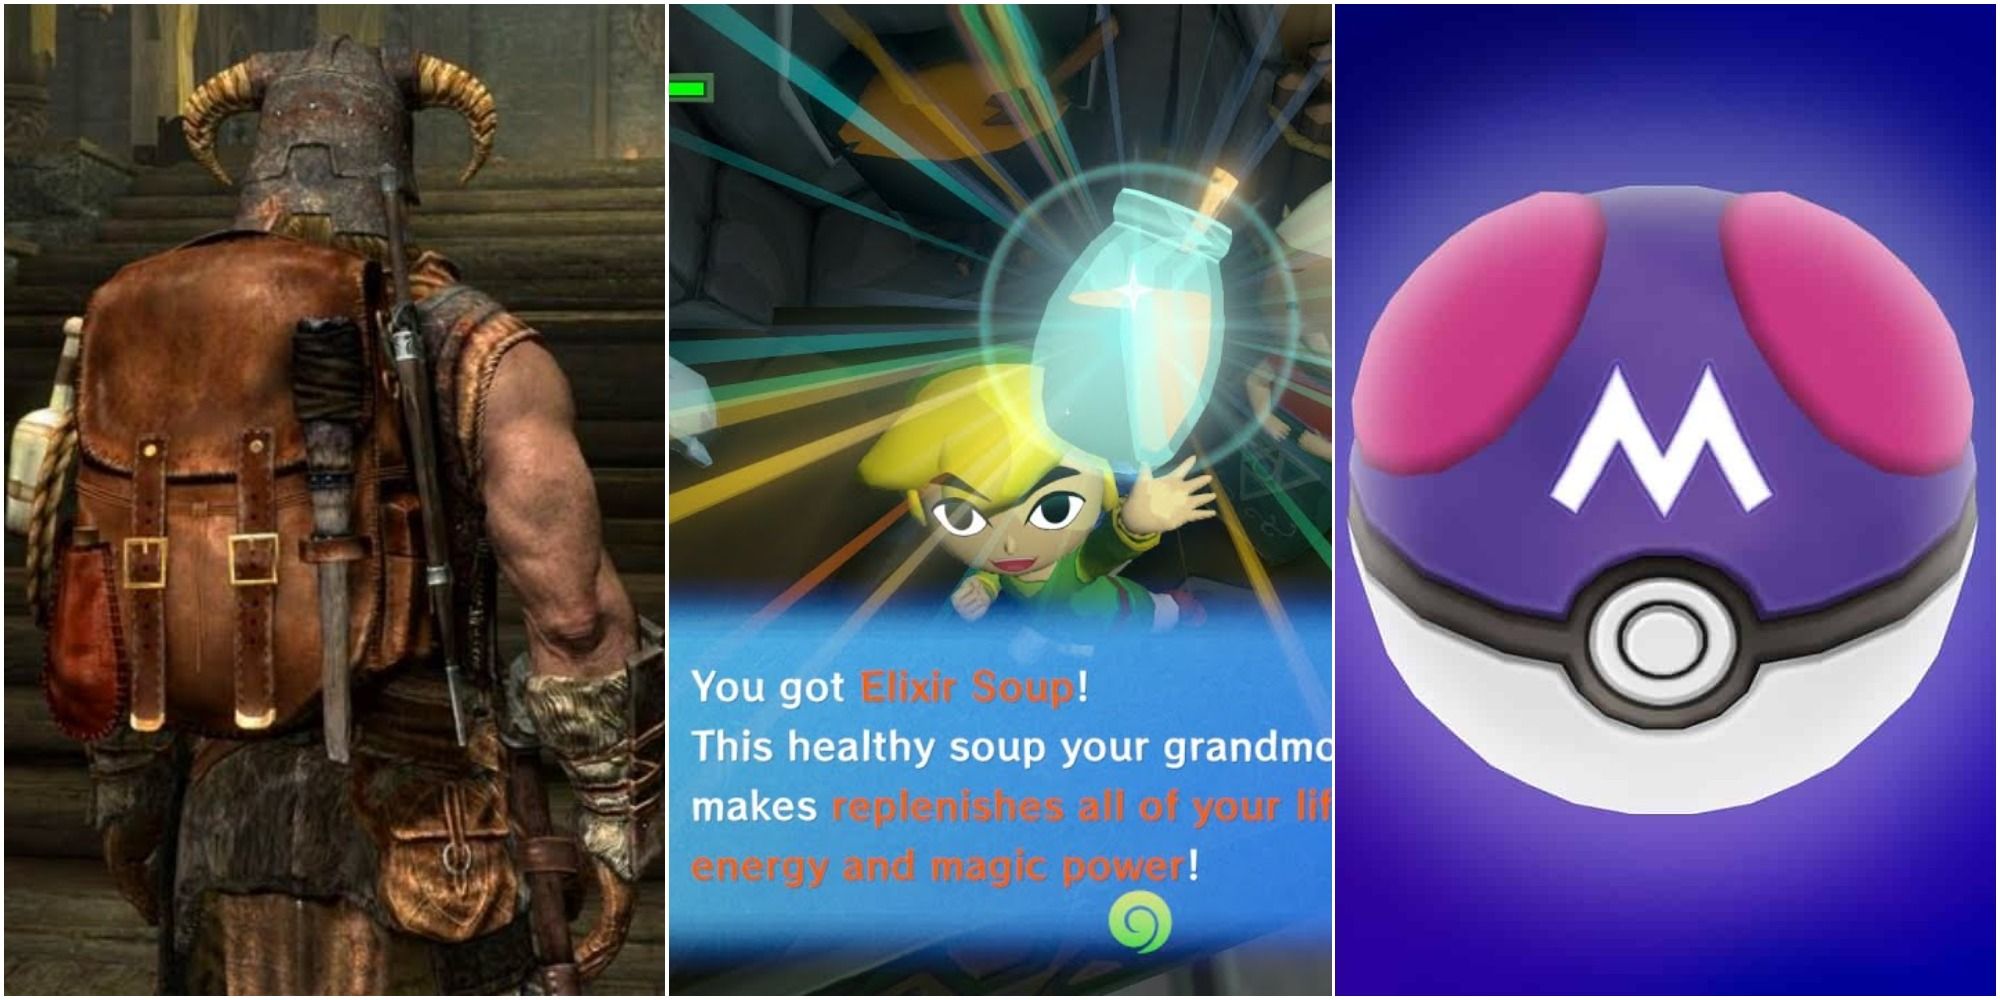 Items in Games You End Up Never Using Featured image showing Skyrim, Zelda and Pokemon